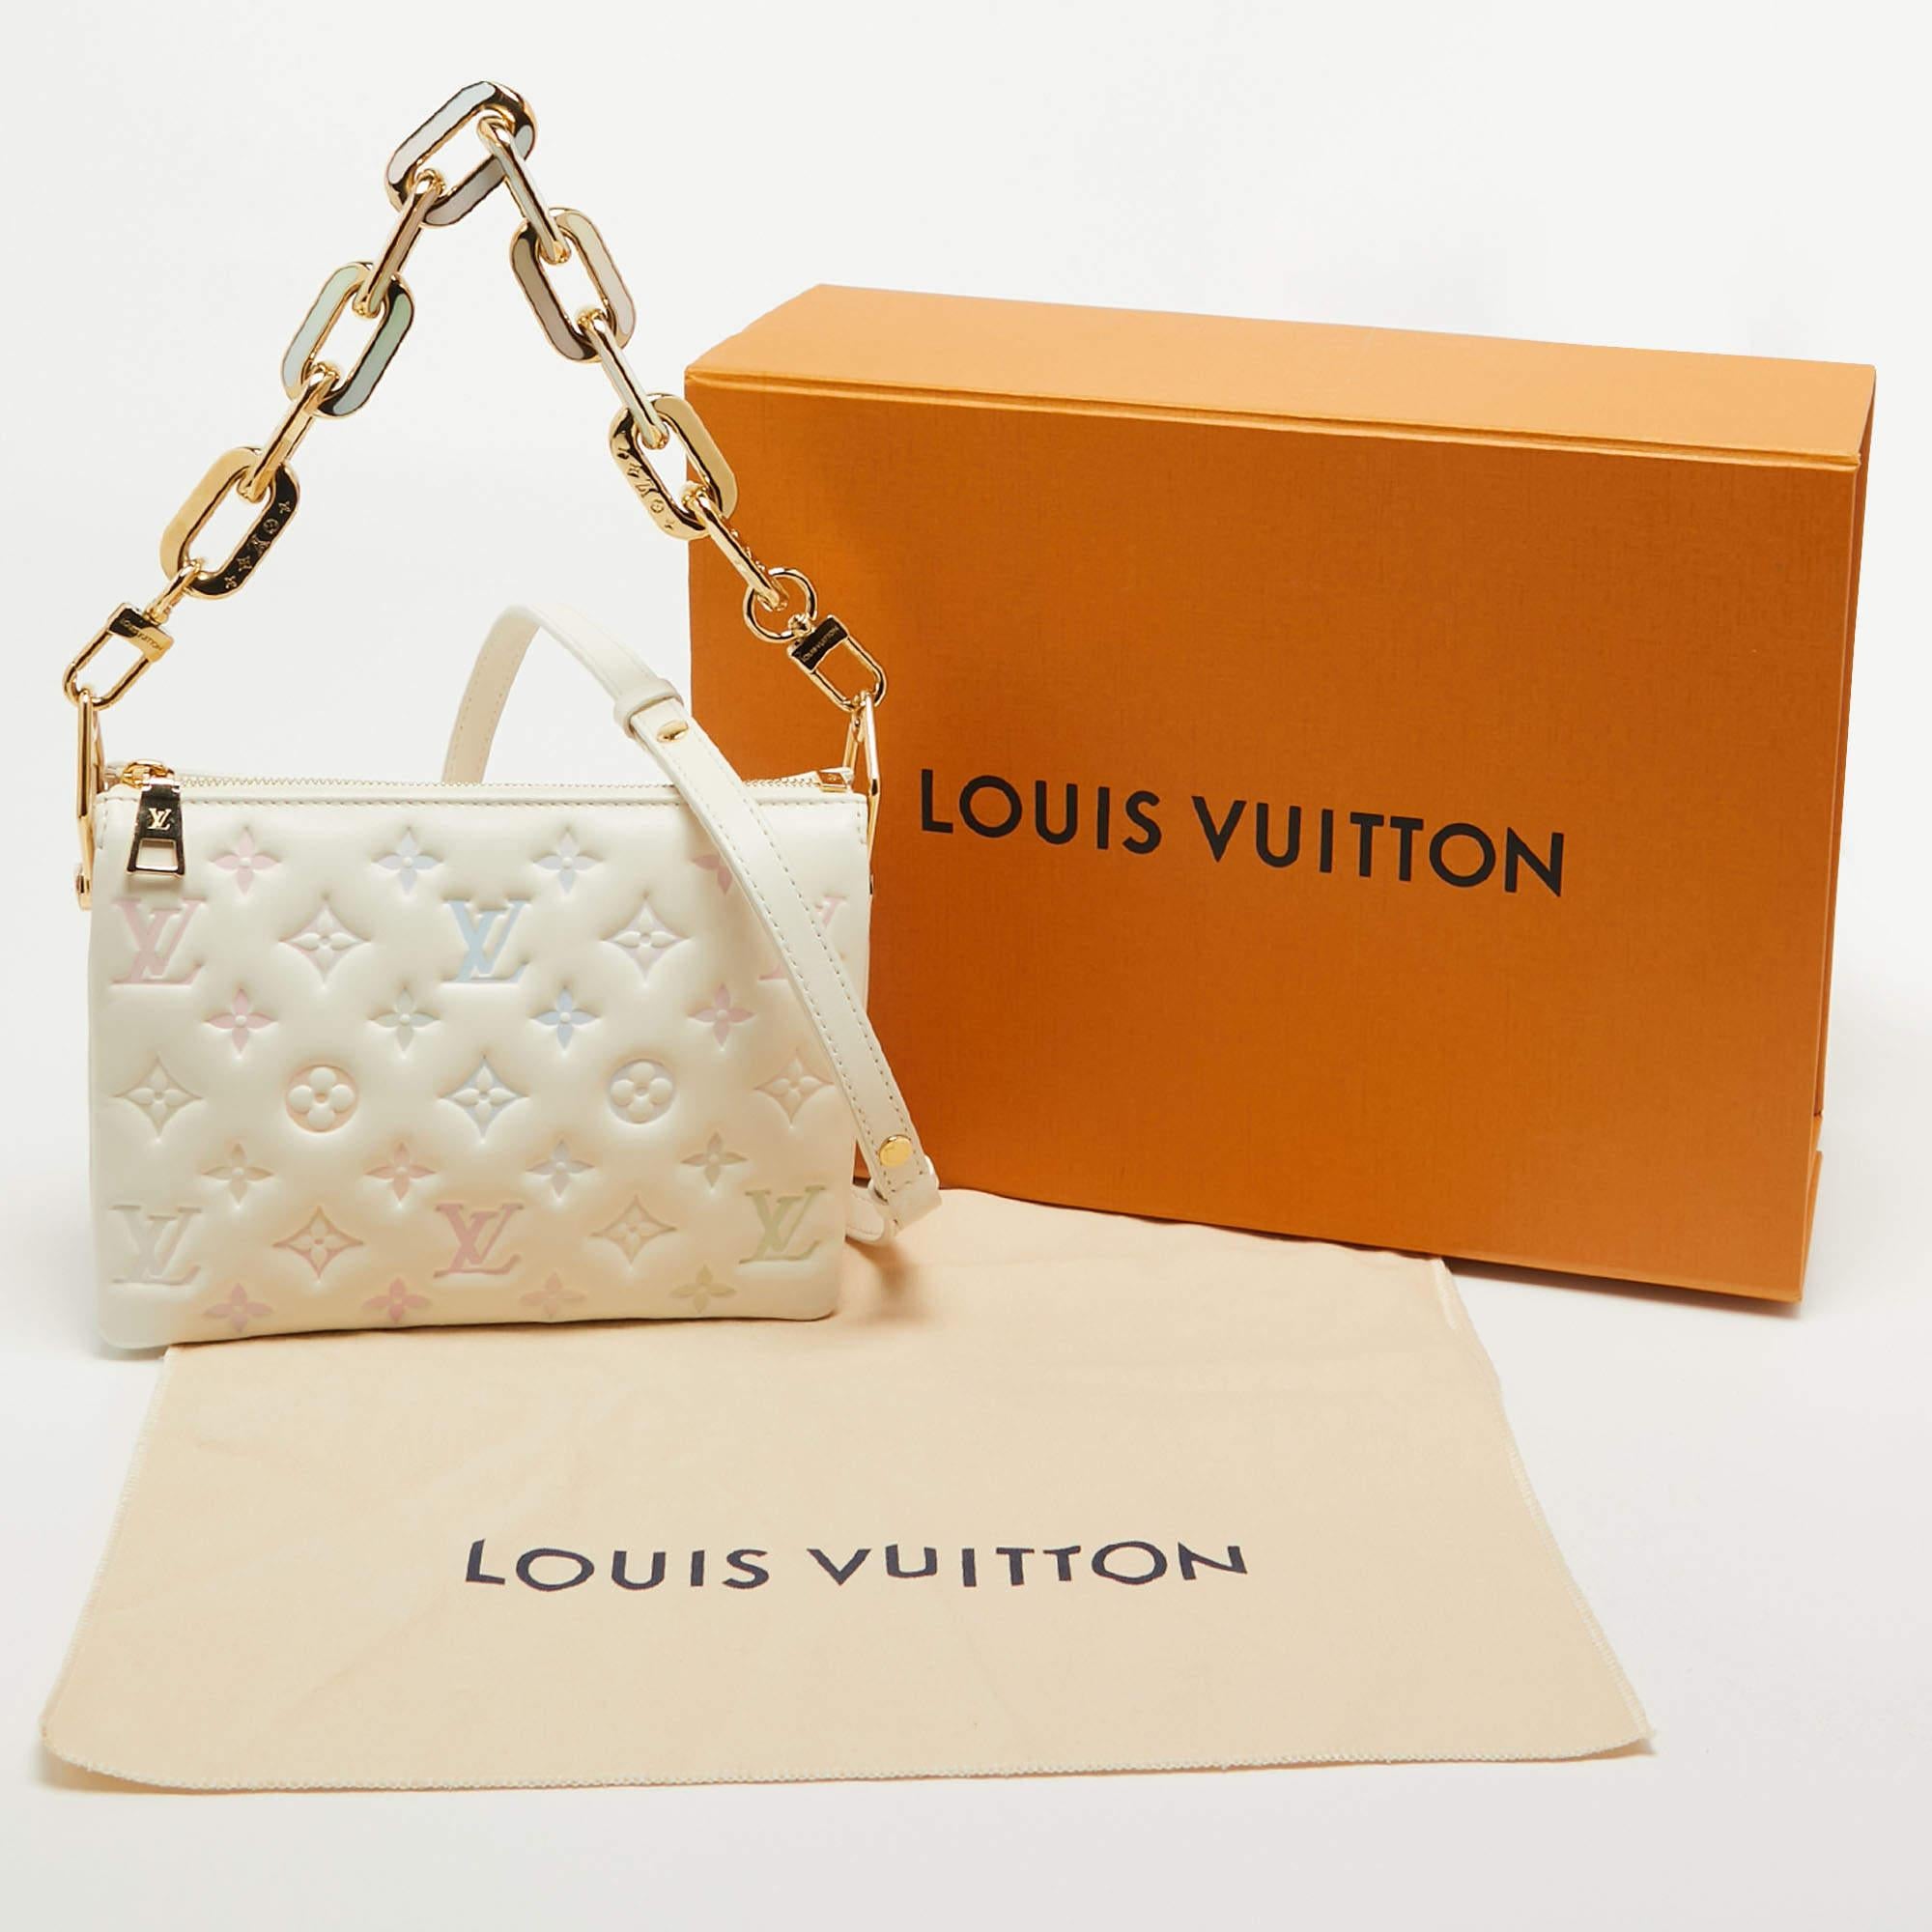 Louis Vuitton Milky Way Monogram Embossed Puffy Leather Coussin BB Bag 2